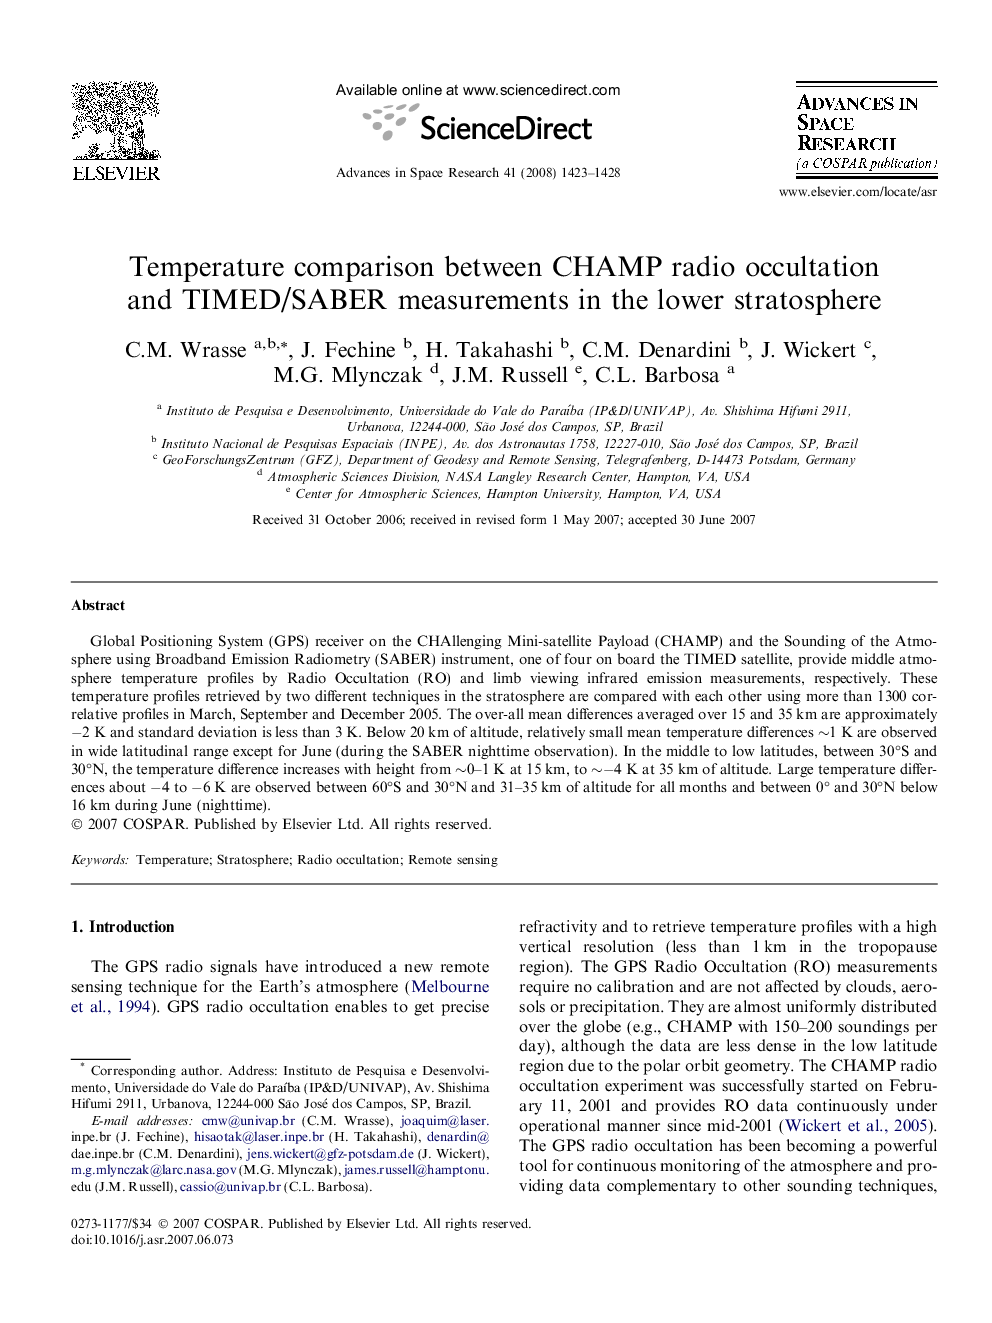 Temperature comparison between CHAMP radio occultation and TIMED/SABER measurements in the lower stratosphere